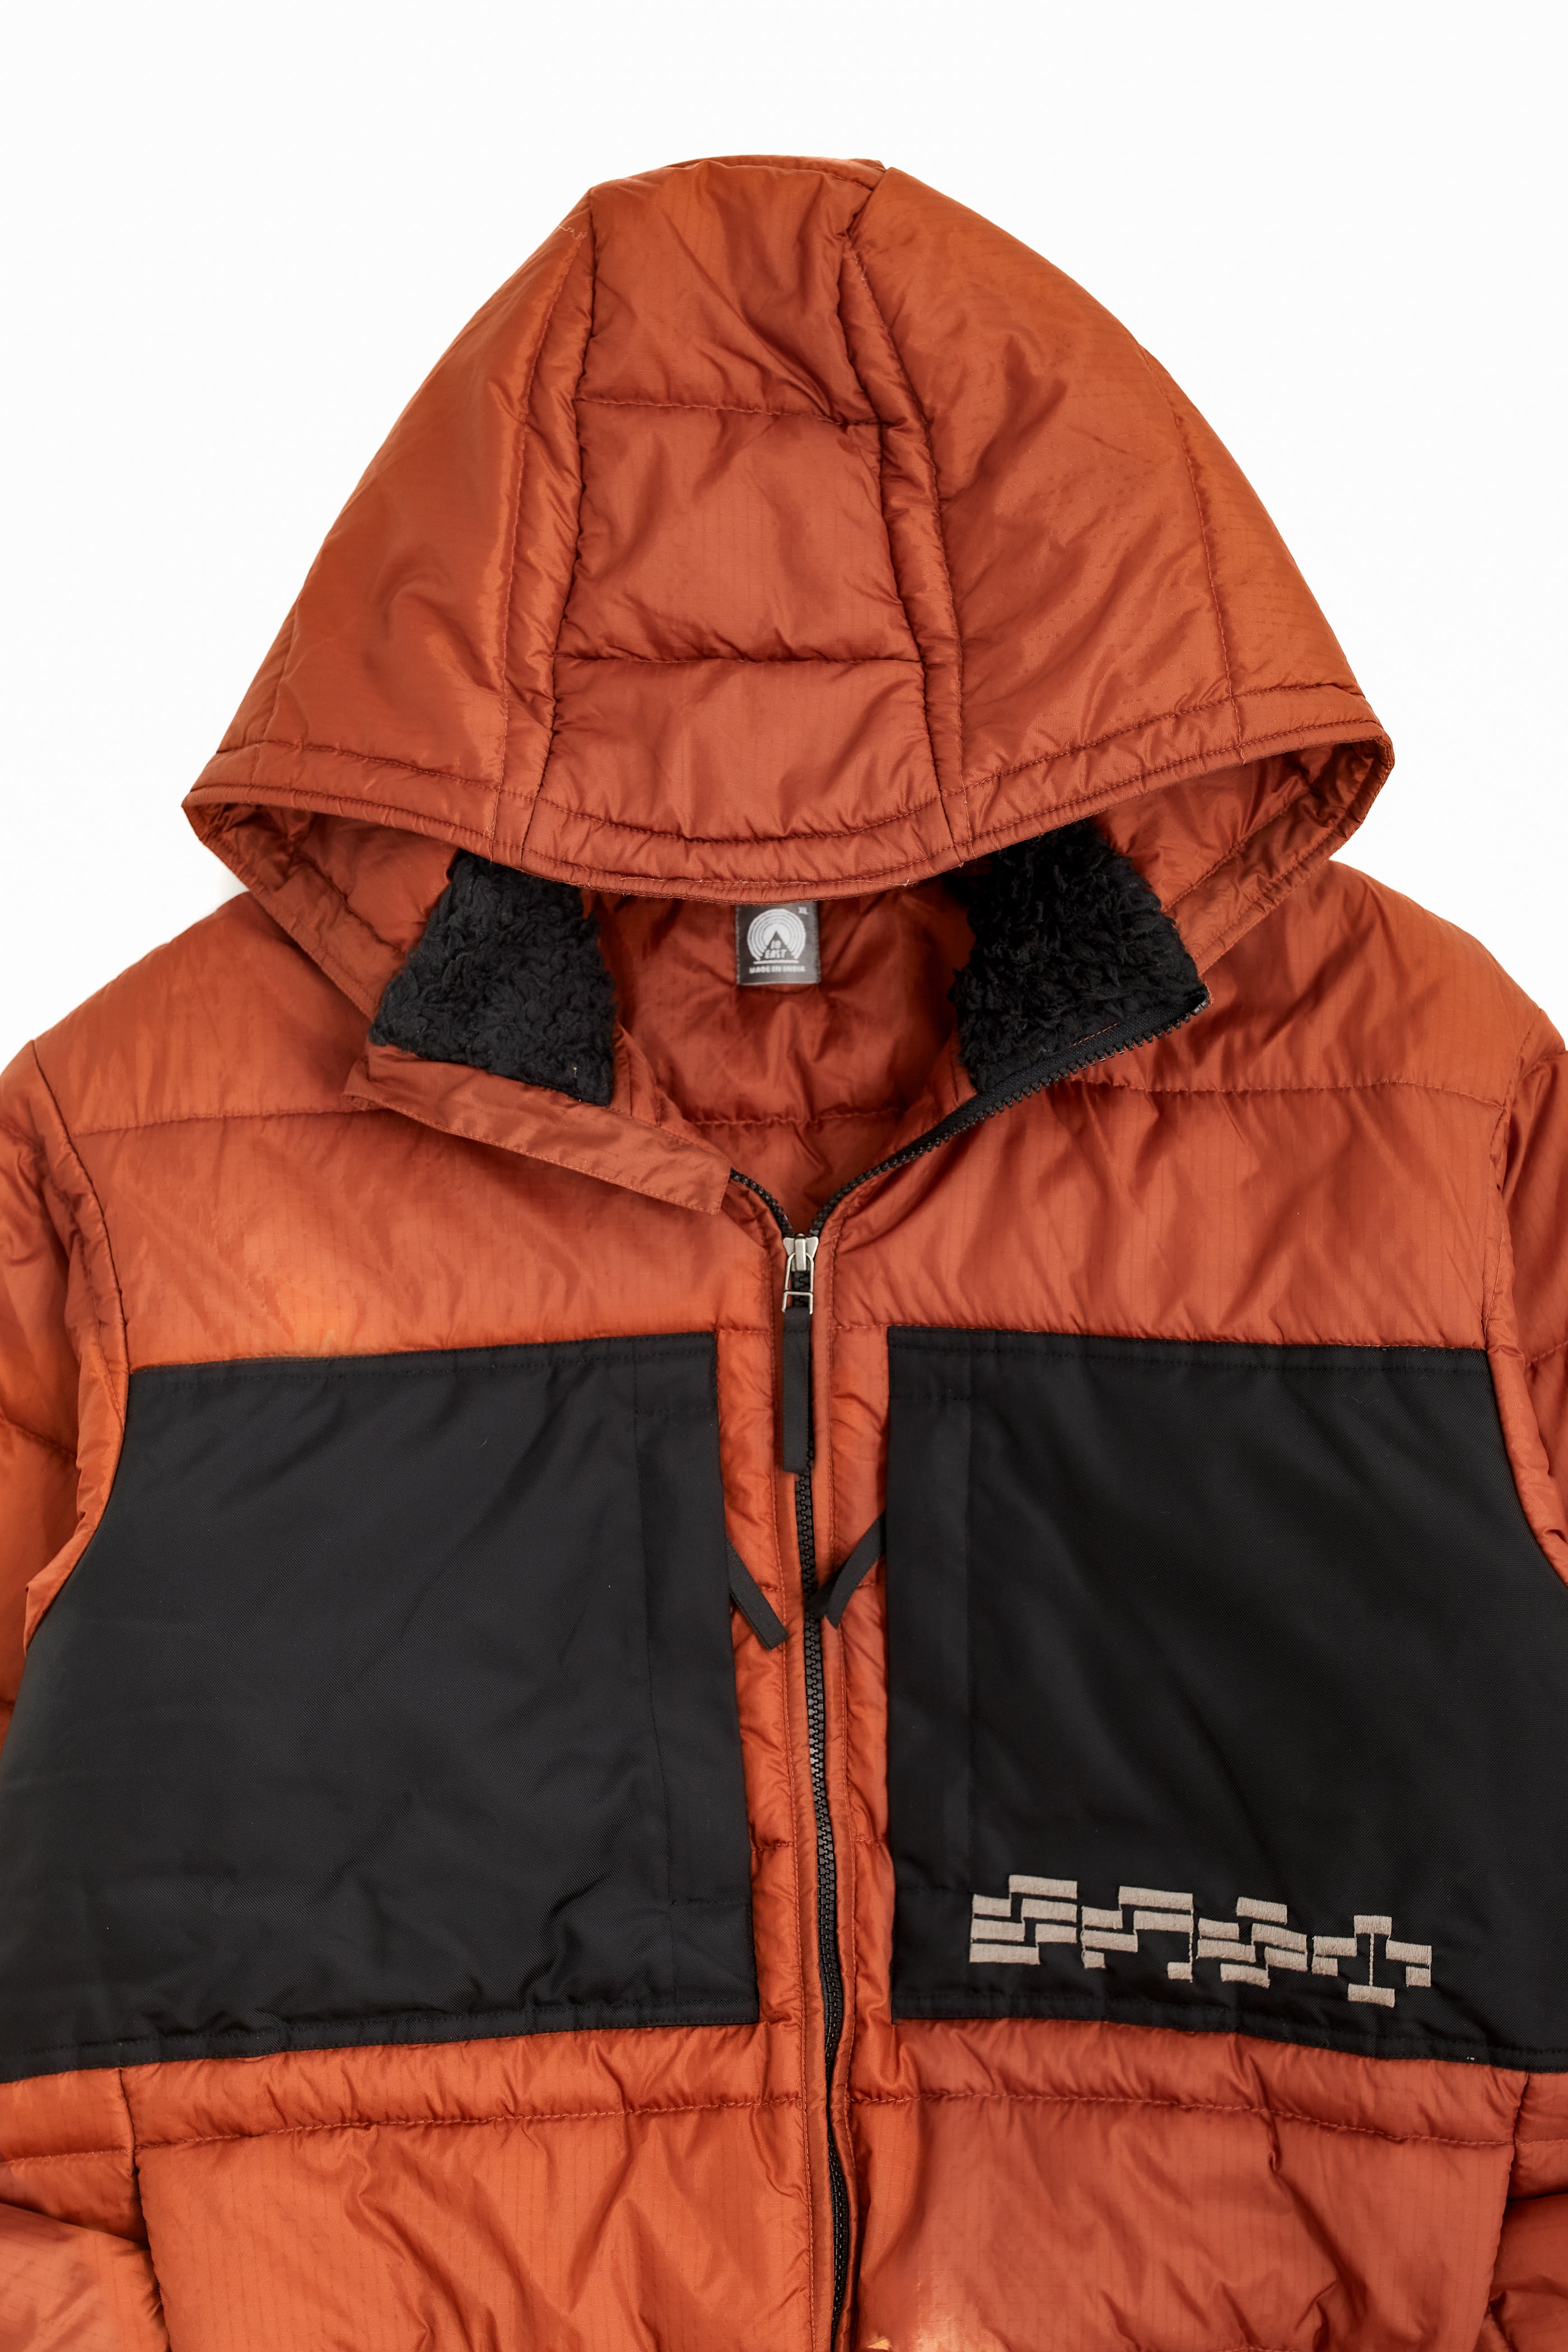 CHITTENDEN QUILTED PARKA - RUST NYLON RIPSTOP